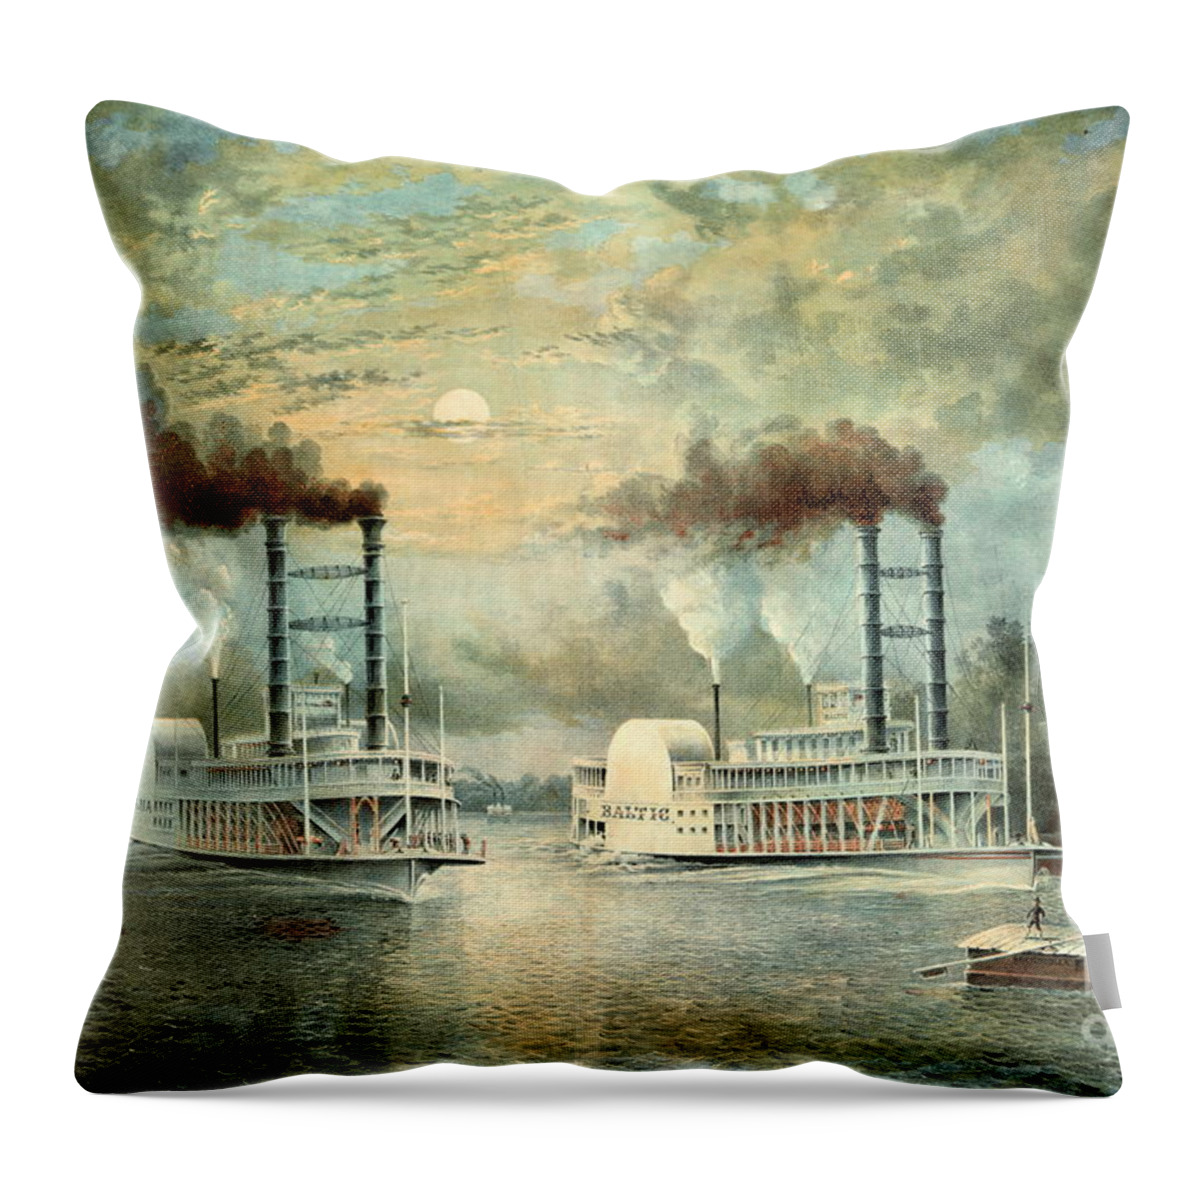 Mississippi Steamboat Race 1859 Throw Pillow featuring the photograph Mississippi Steamboat Race 1859 by Padre Art